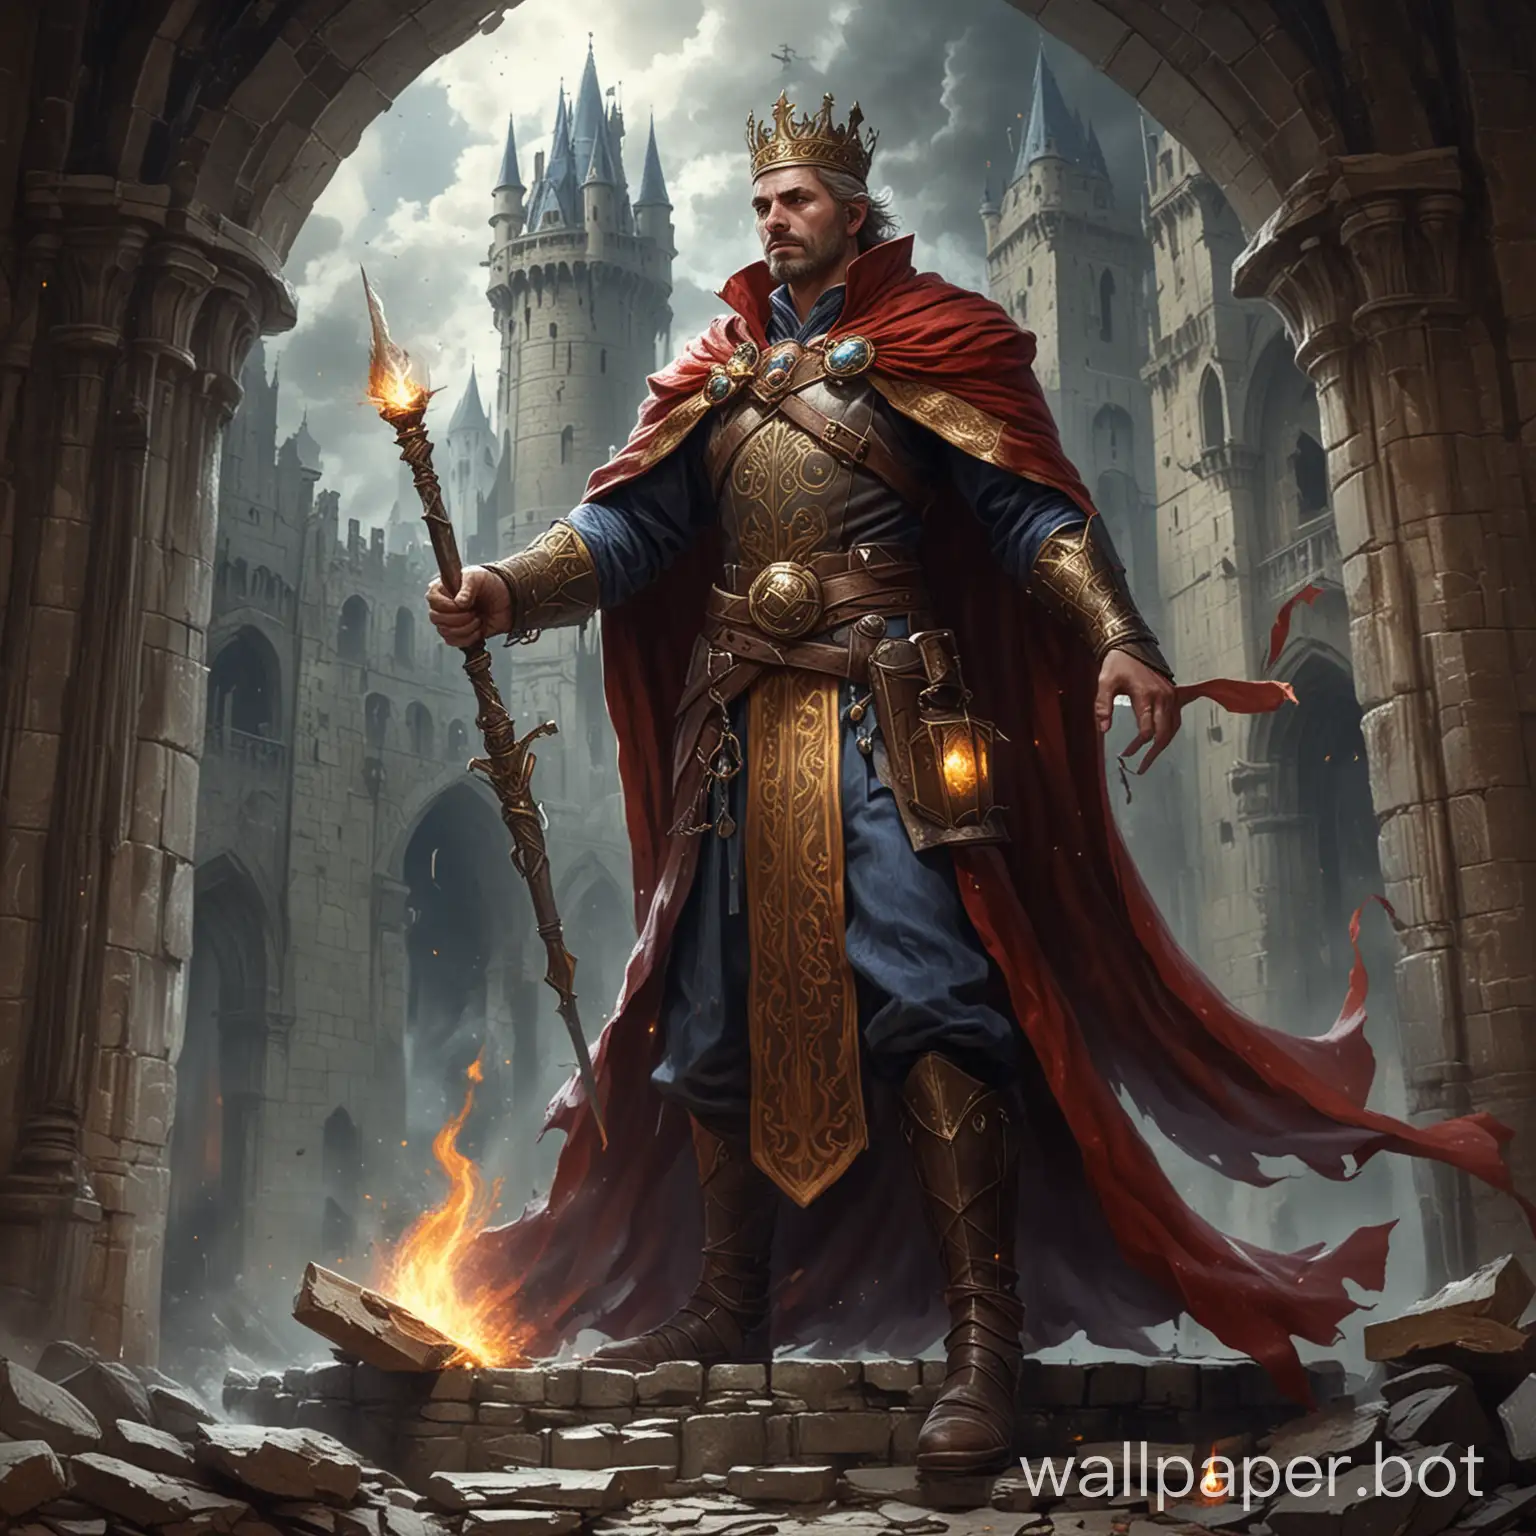 Powerful-Fantasy-Mage-in-Tower-Welcomes-King-with-Strong-Magic